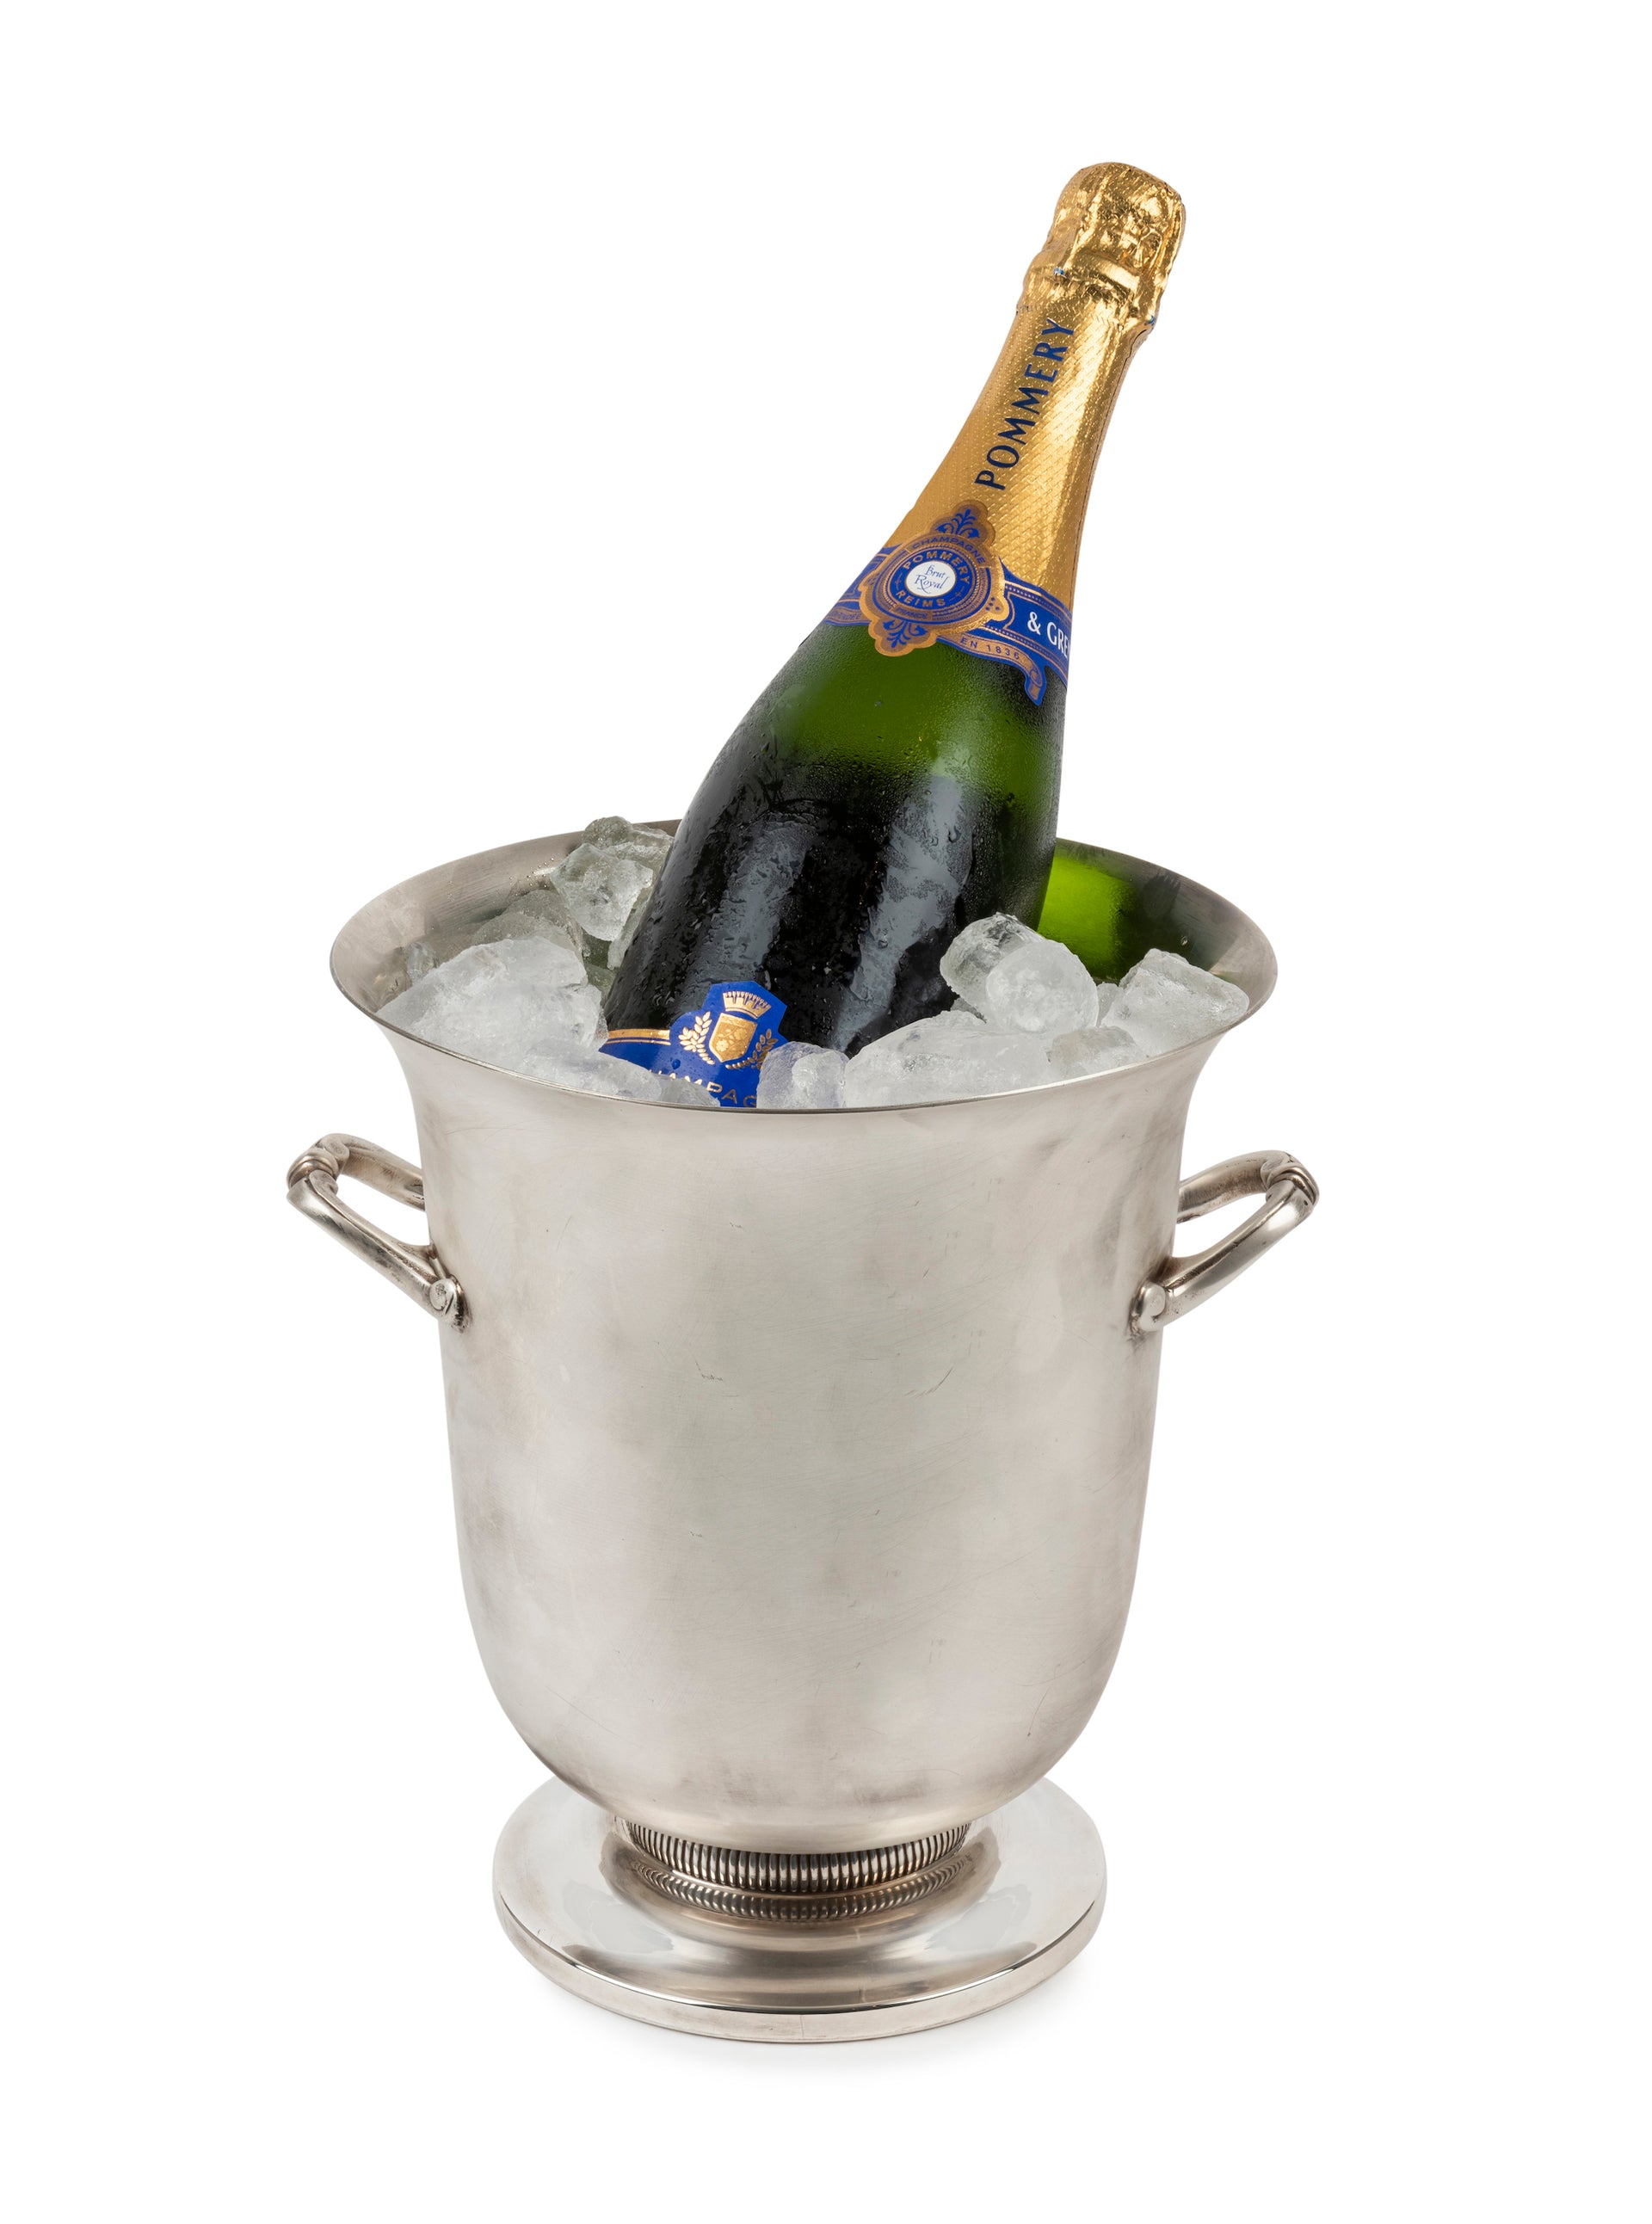 SOLD A French vintage silver plated twin handled wine cooler